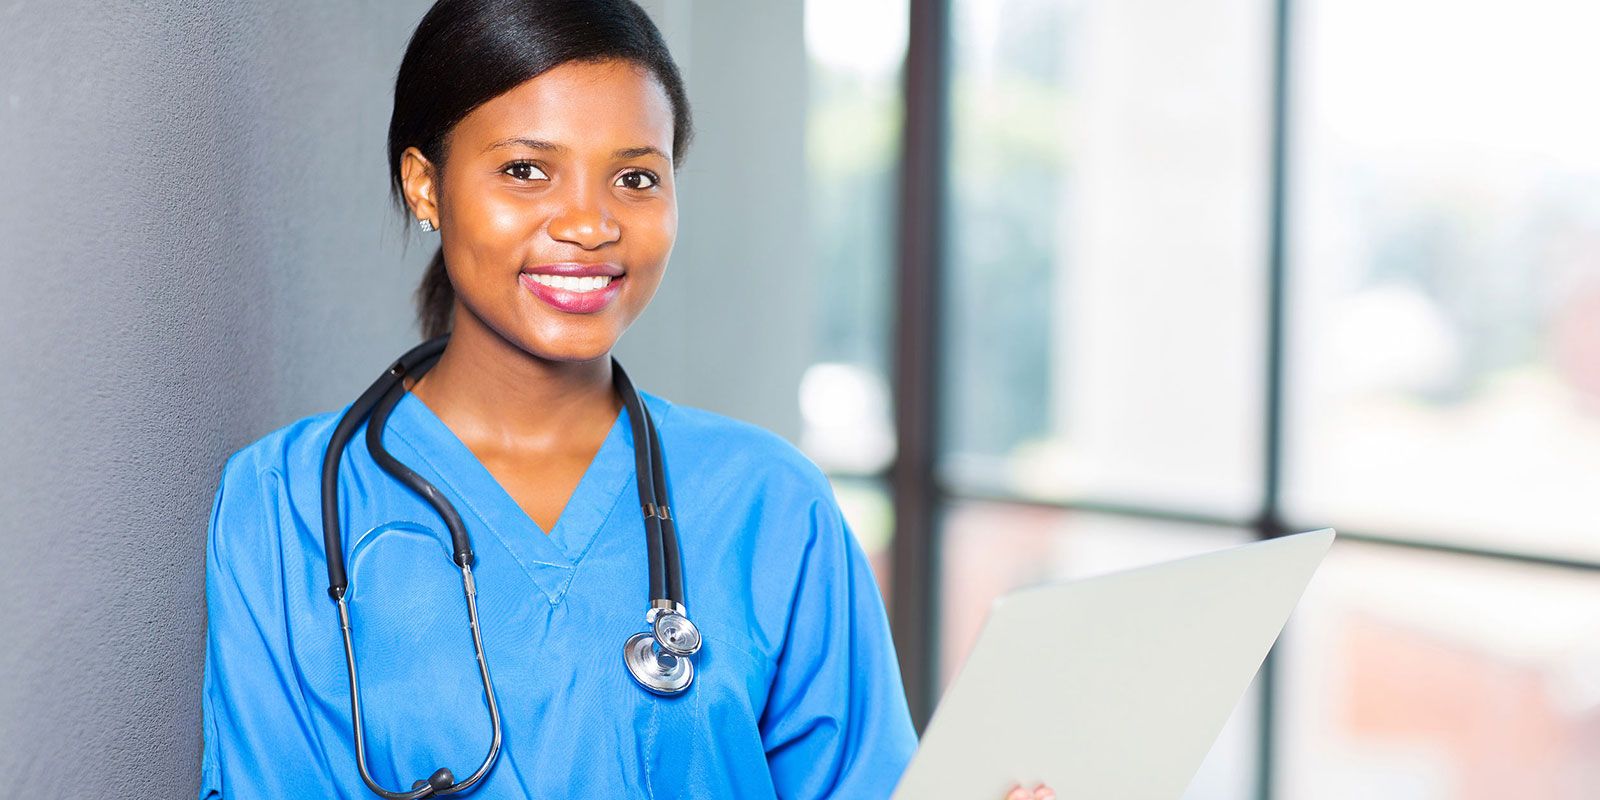 Conclusion | How A Personal Philosophy of Nursing Can Help Your Career